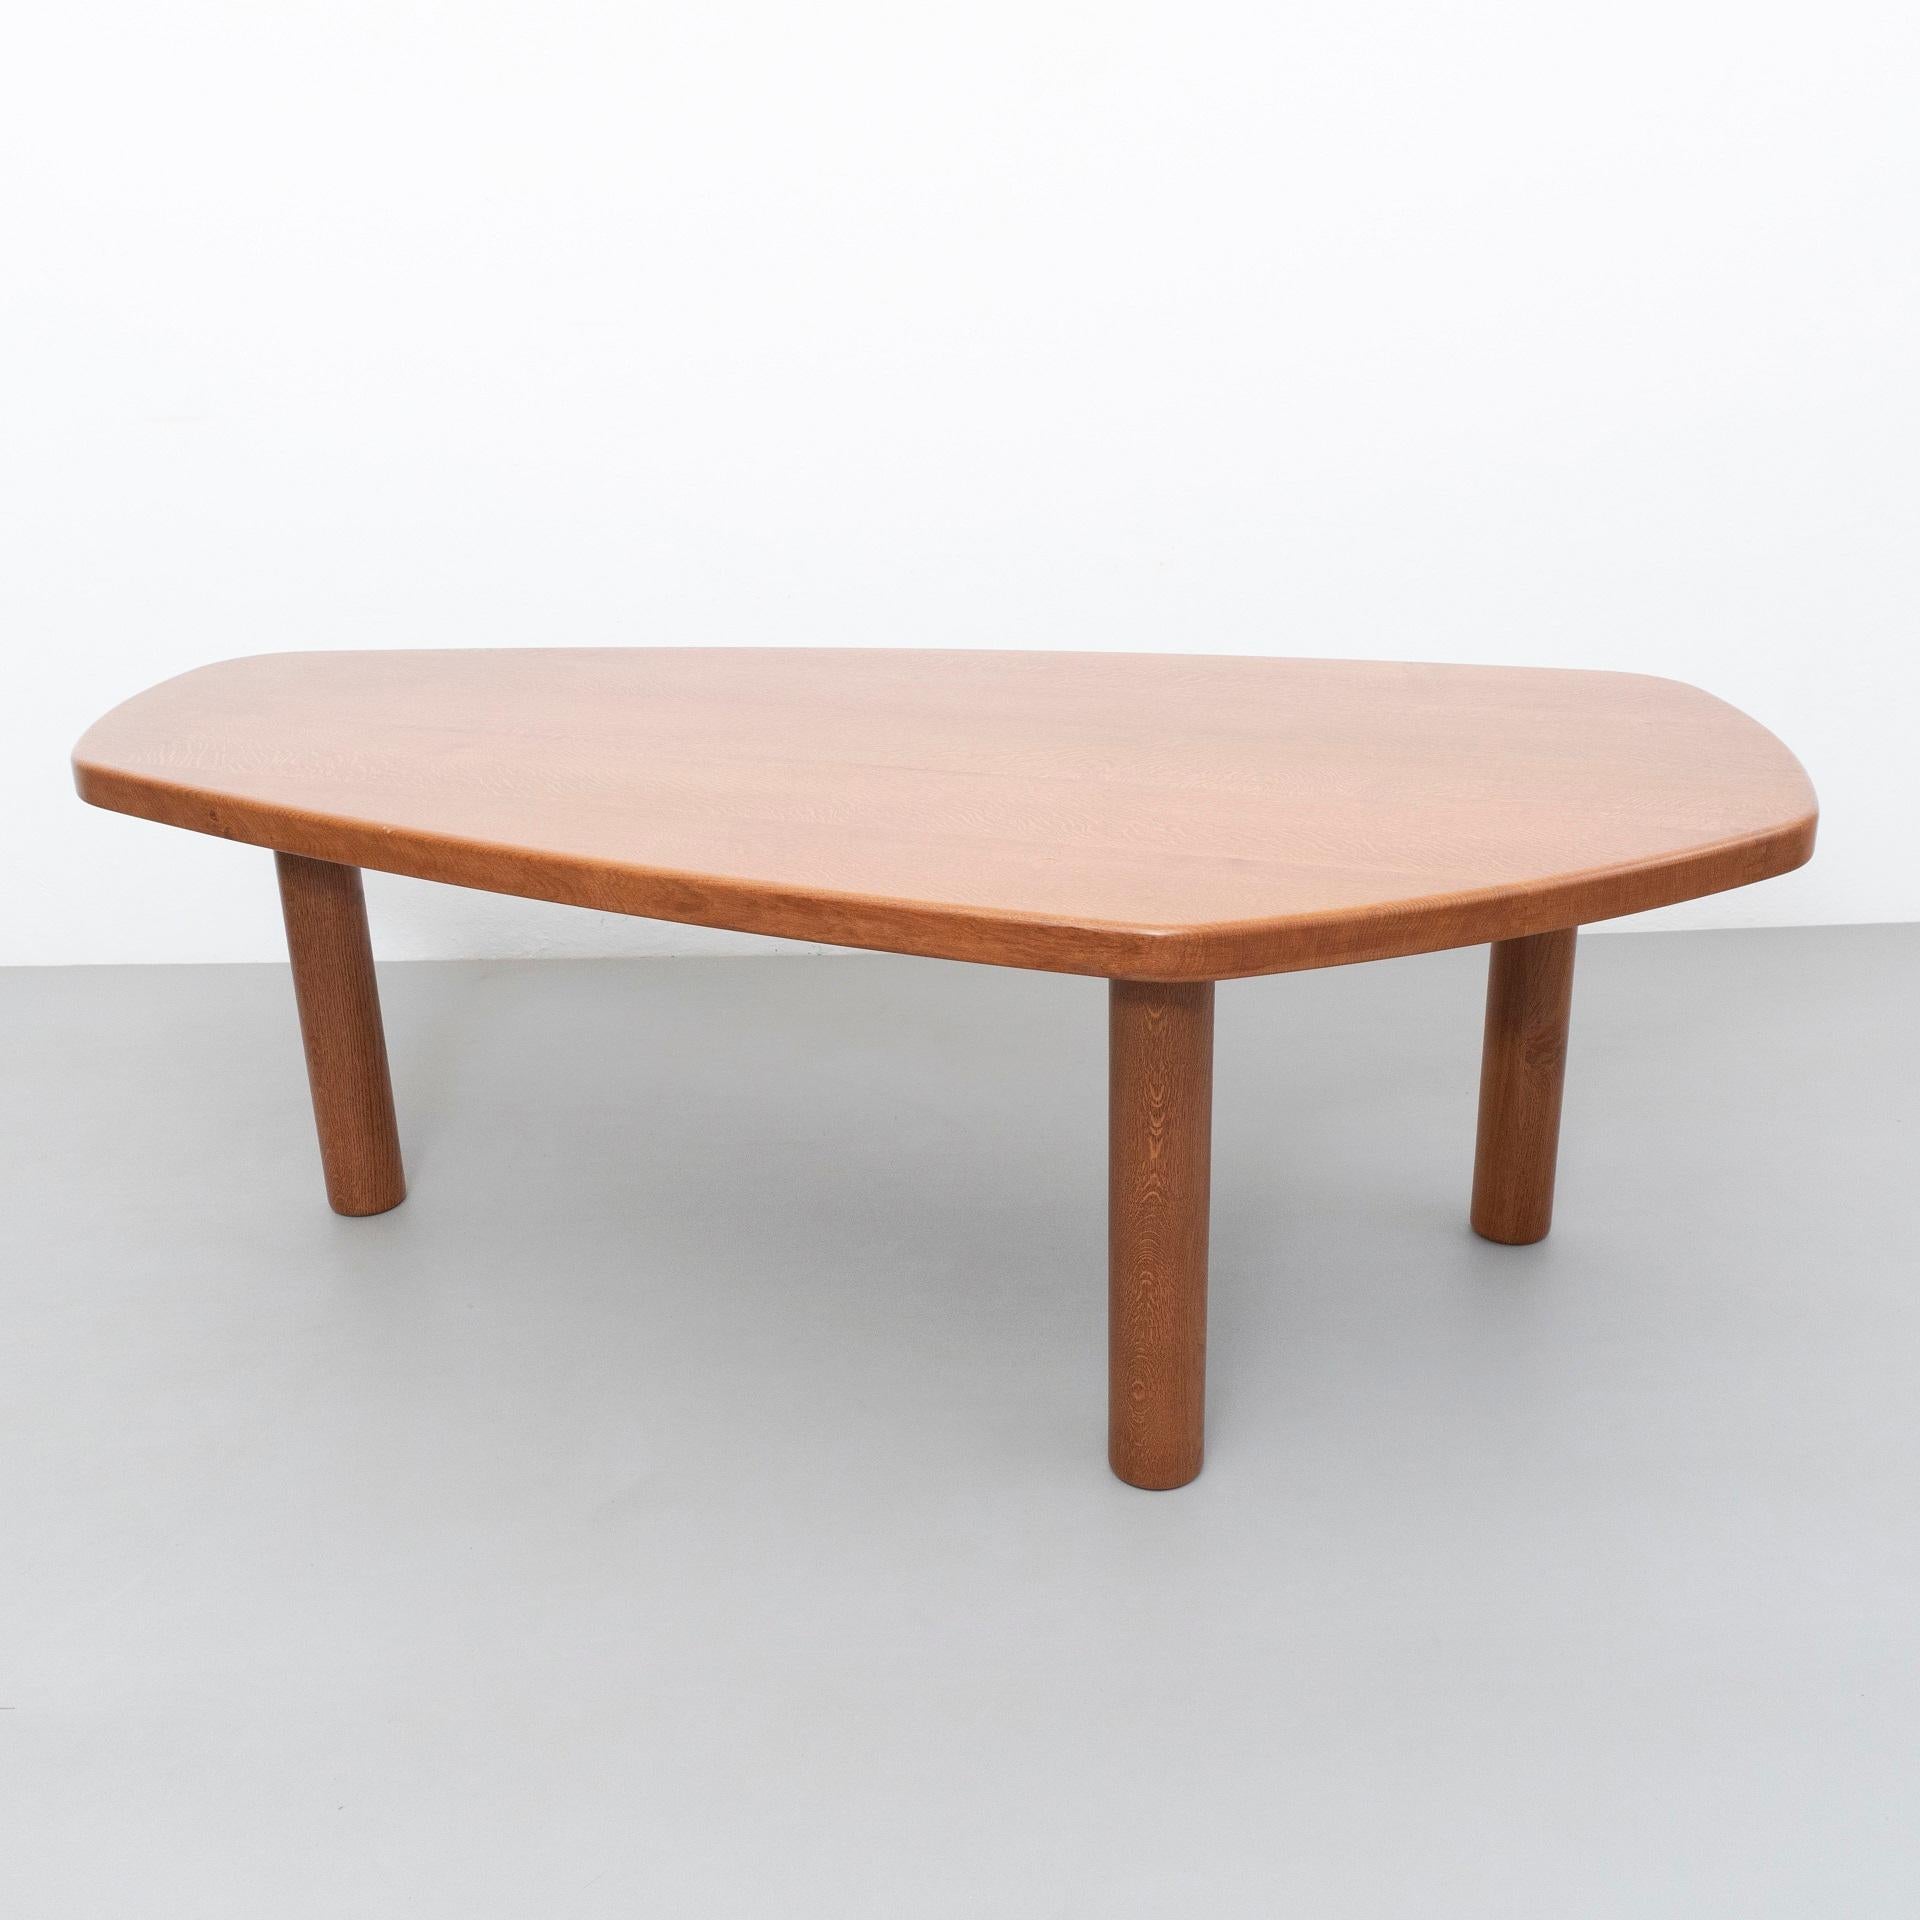 Large freeform dining table by dada - est. manufactured in Barcelona.

Oak

Measures: 112 cm D x 220 cm W x 76 cm H 


Dada Est. / Makes a handmade furniture production with the best materials and finishes as in the old days.

Influenced by the